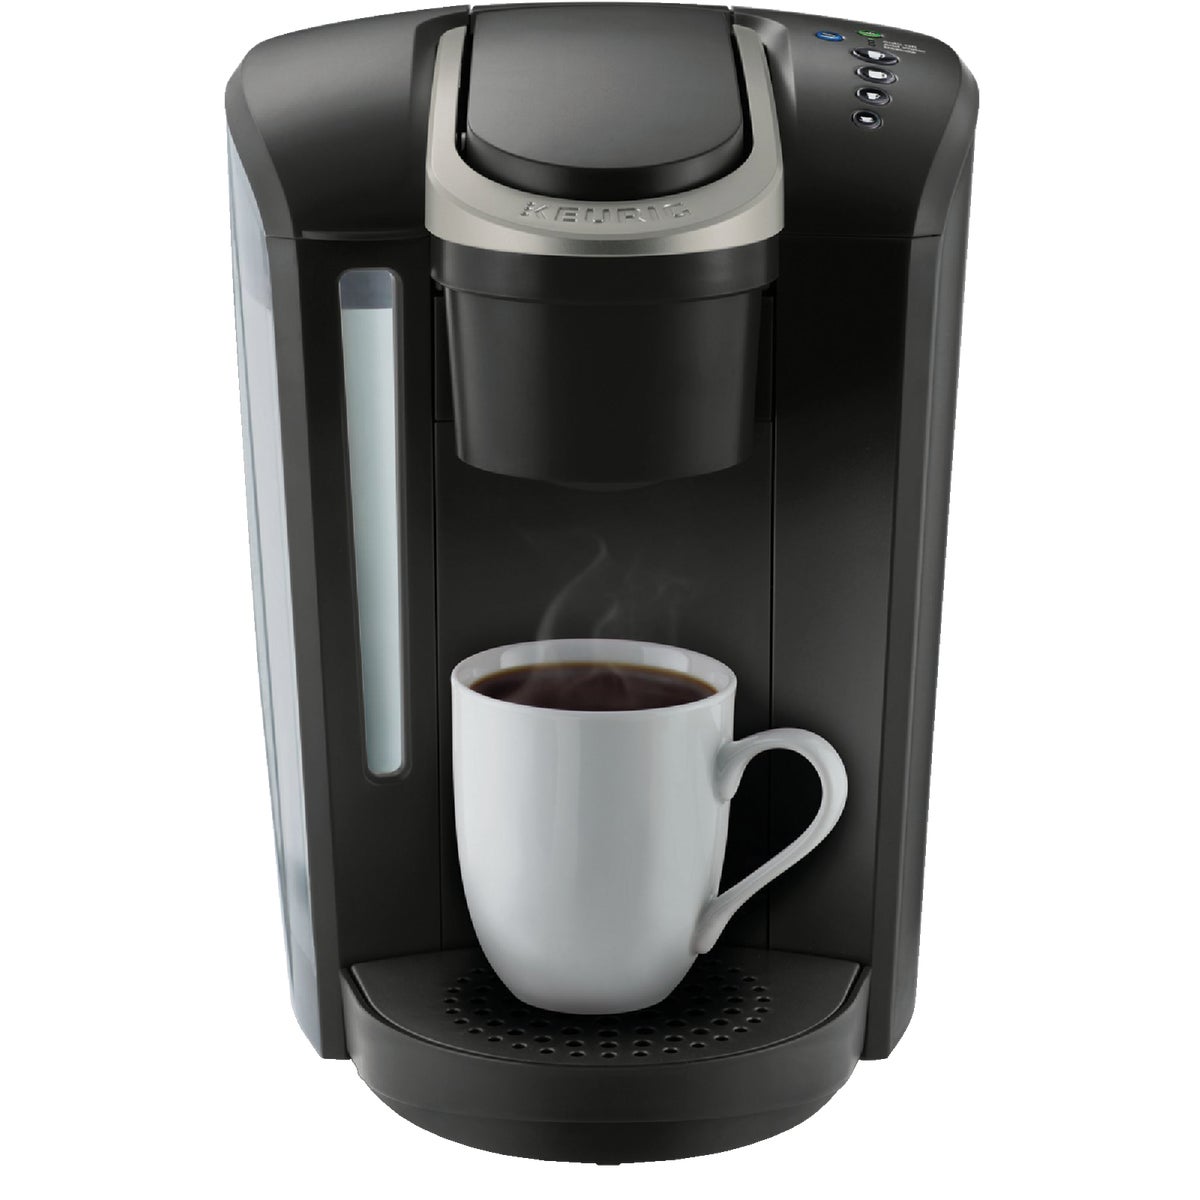 Item 603367, K-Select single coffee maker combines sleek design and simple button 